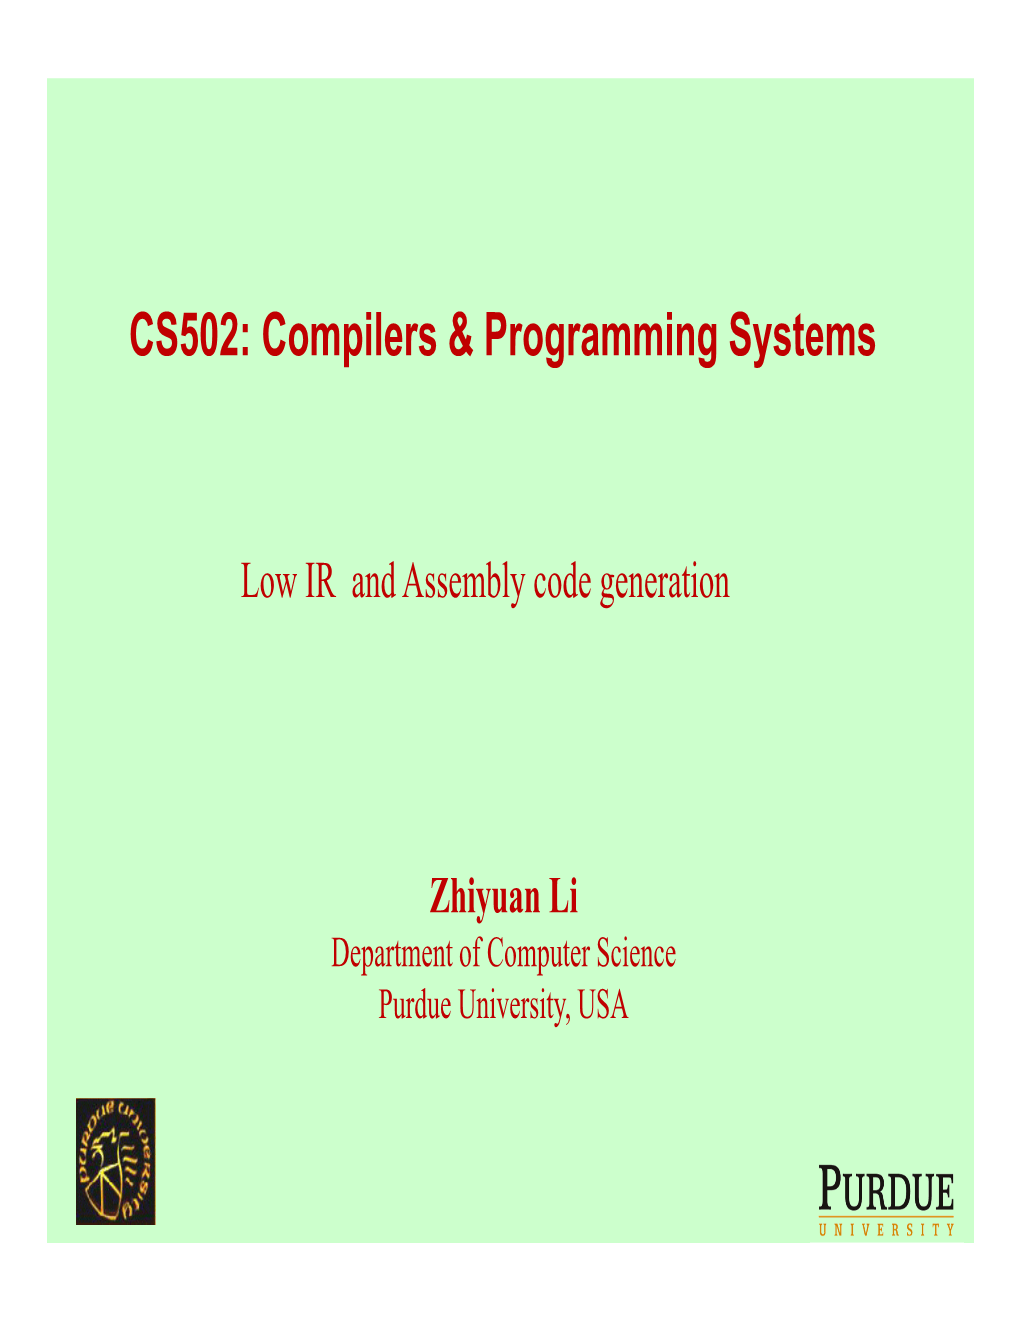 Compilers & Programming Systems